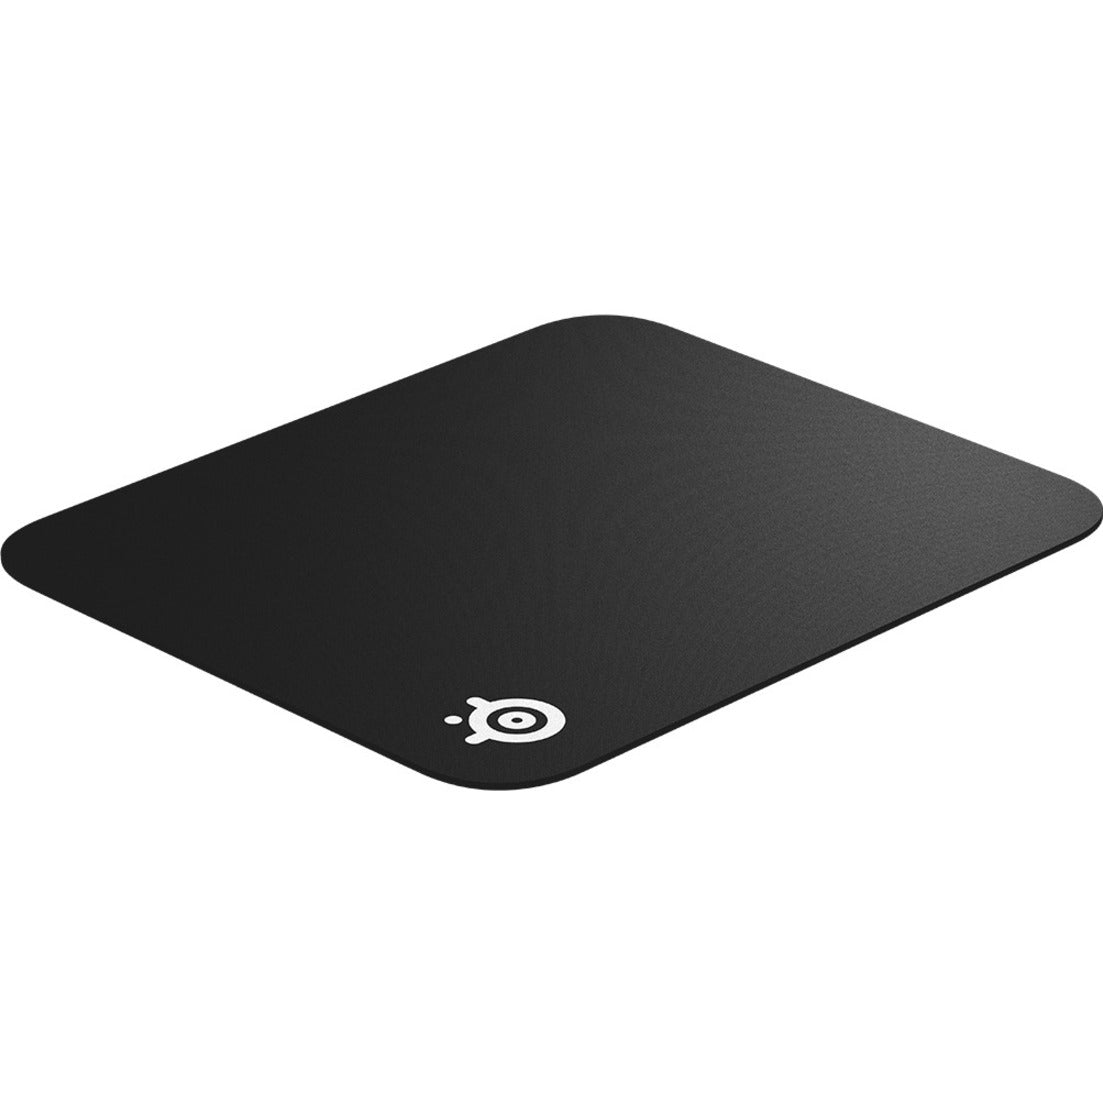 SteelSeries 63836 Cloth Gaming Mouse Pad, Anti-slip, Black, Micro-woven Fabric